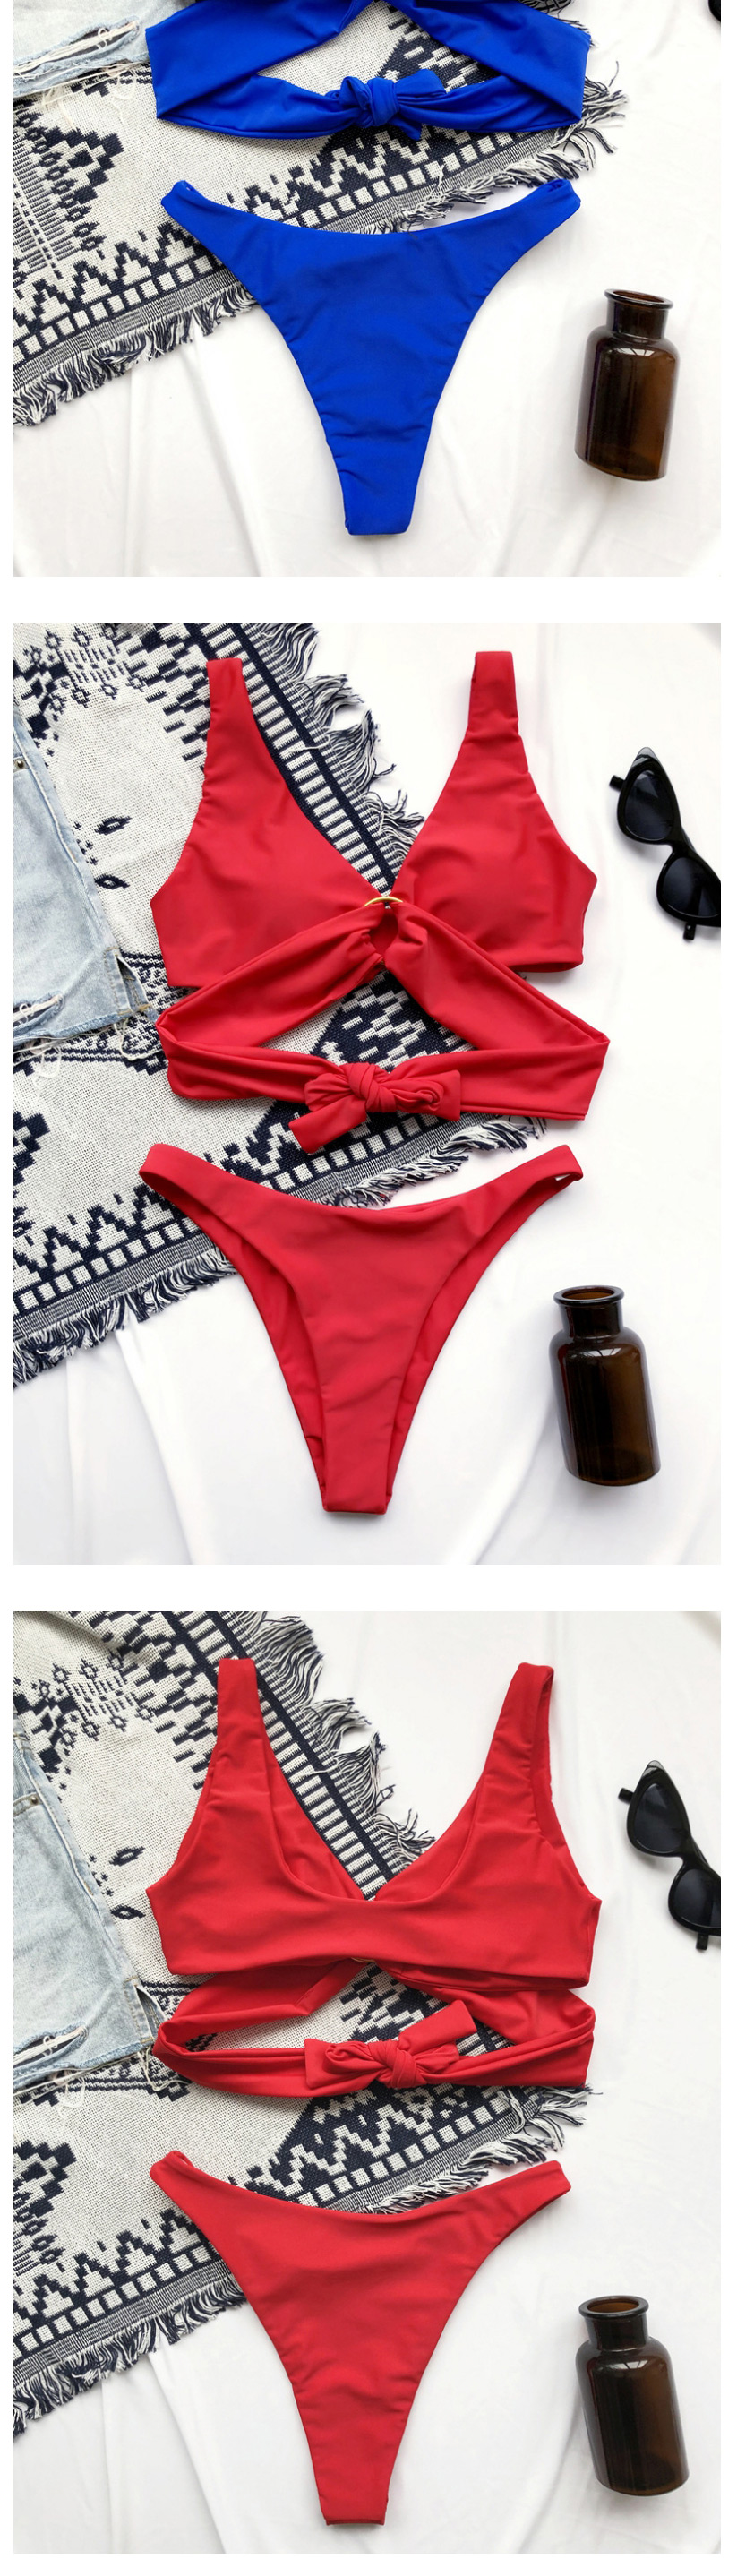 Fashion White Solid Color Metal Ring Hollow Double-sided Split Swimsuit,Bikini Sets